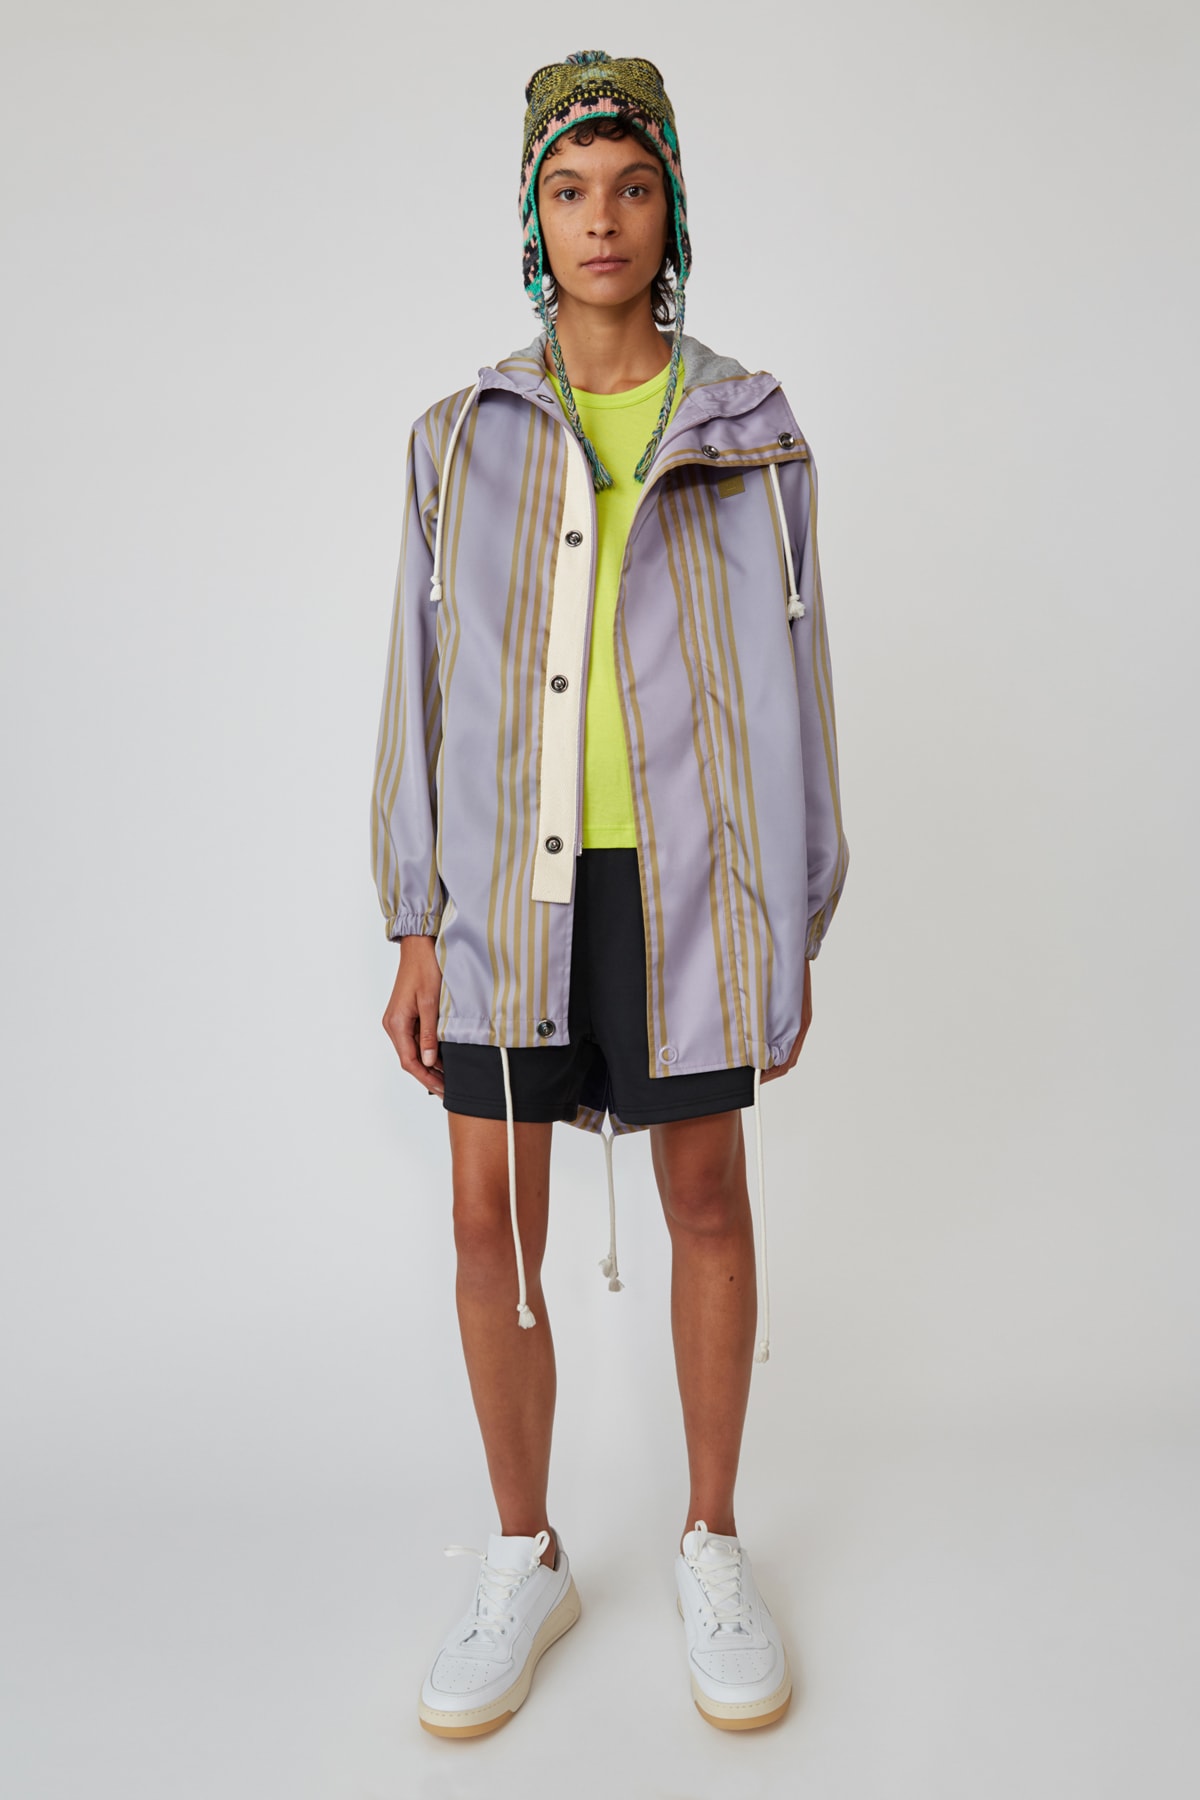 Acne Studios Spring/Summer 2019 Face Collection Anorak Purple Shorts Black